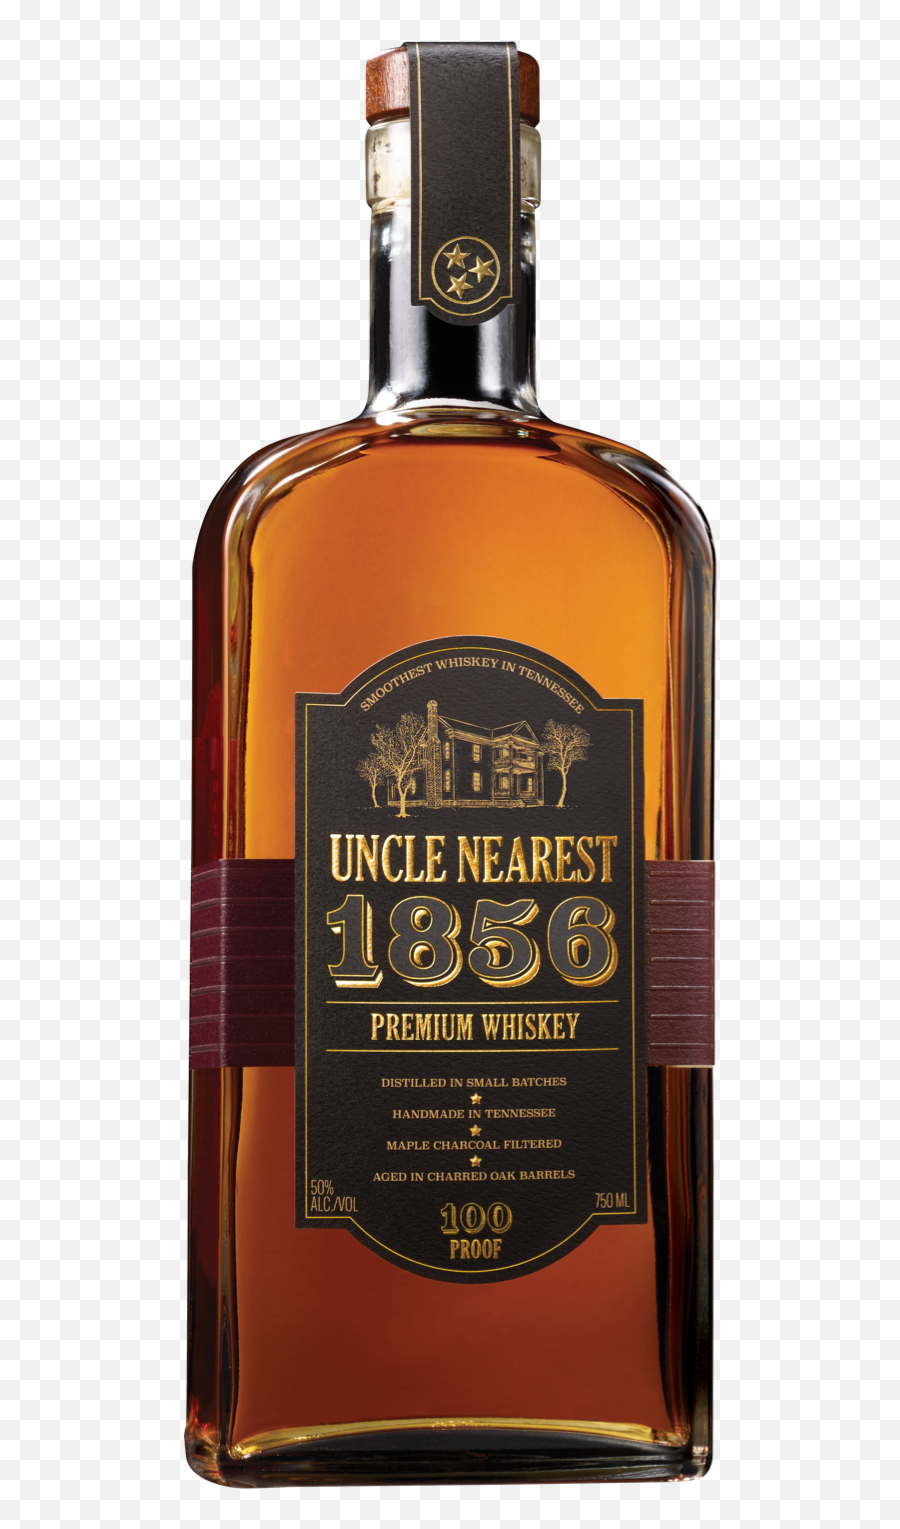 Uncle Nearest Premium Whiskey - Scotch Whisky Png,Whiskey Bottle Png